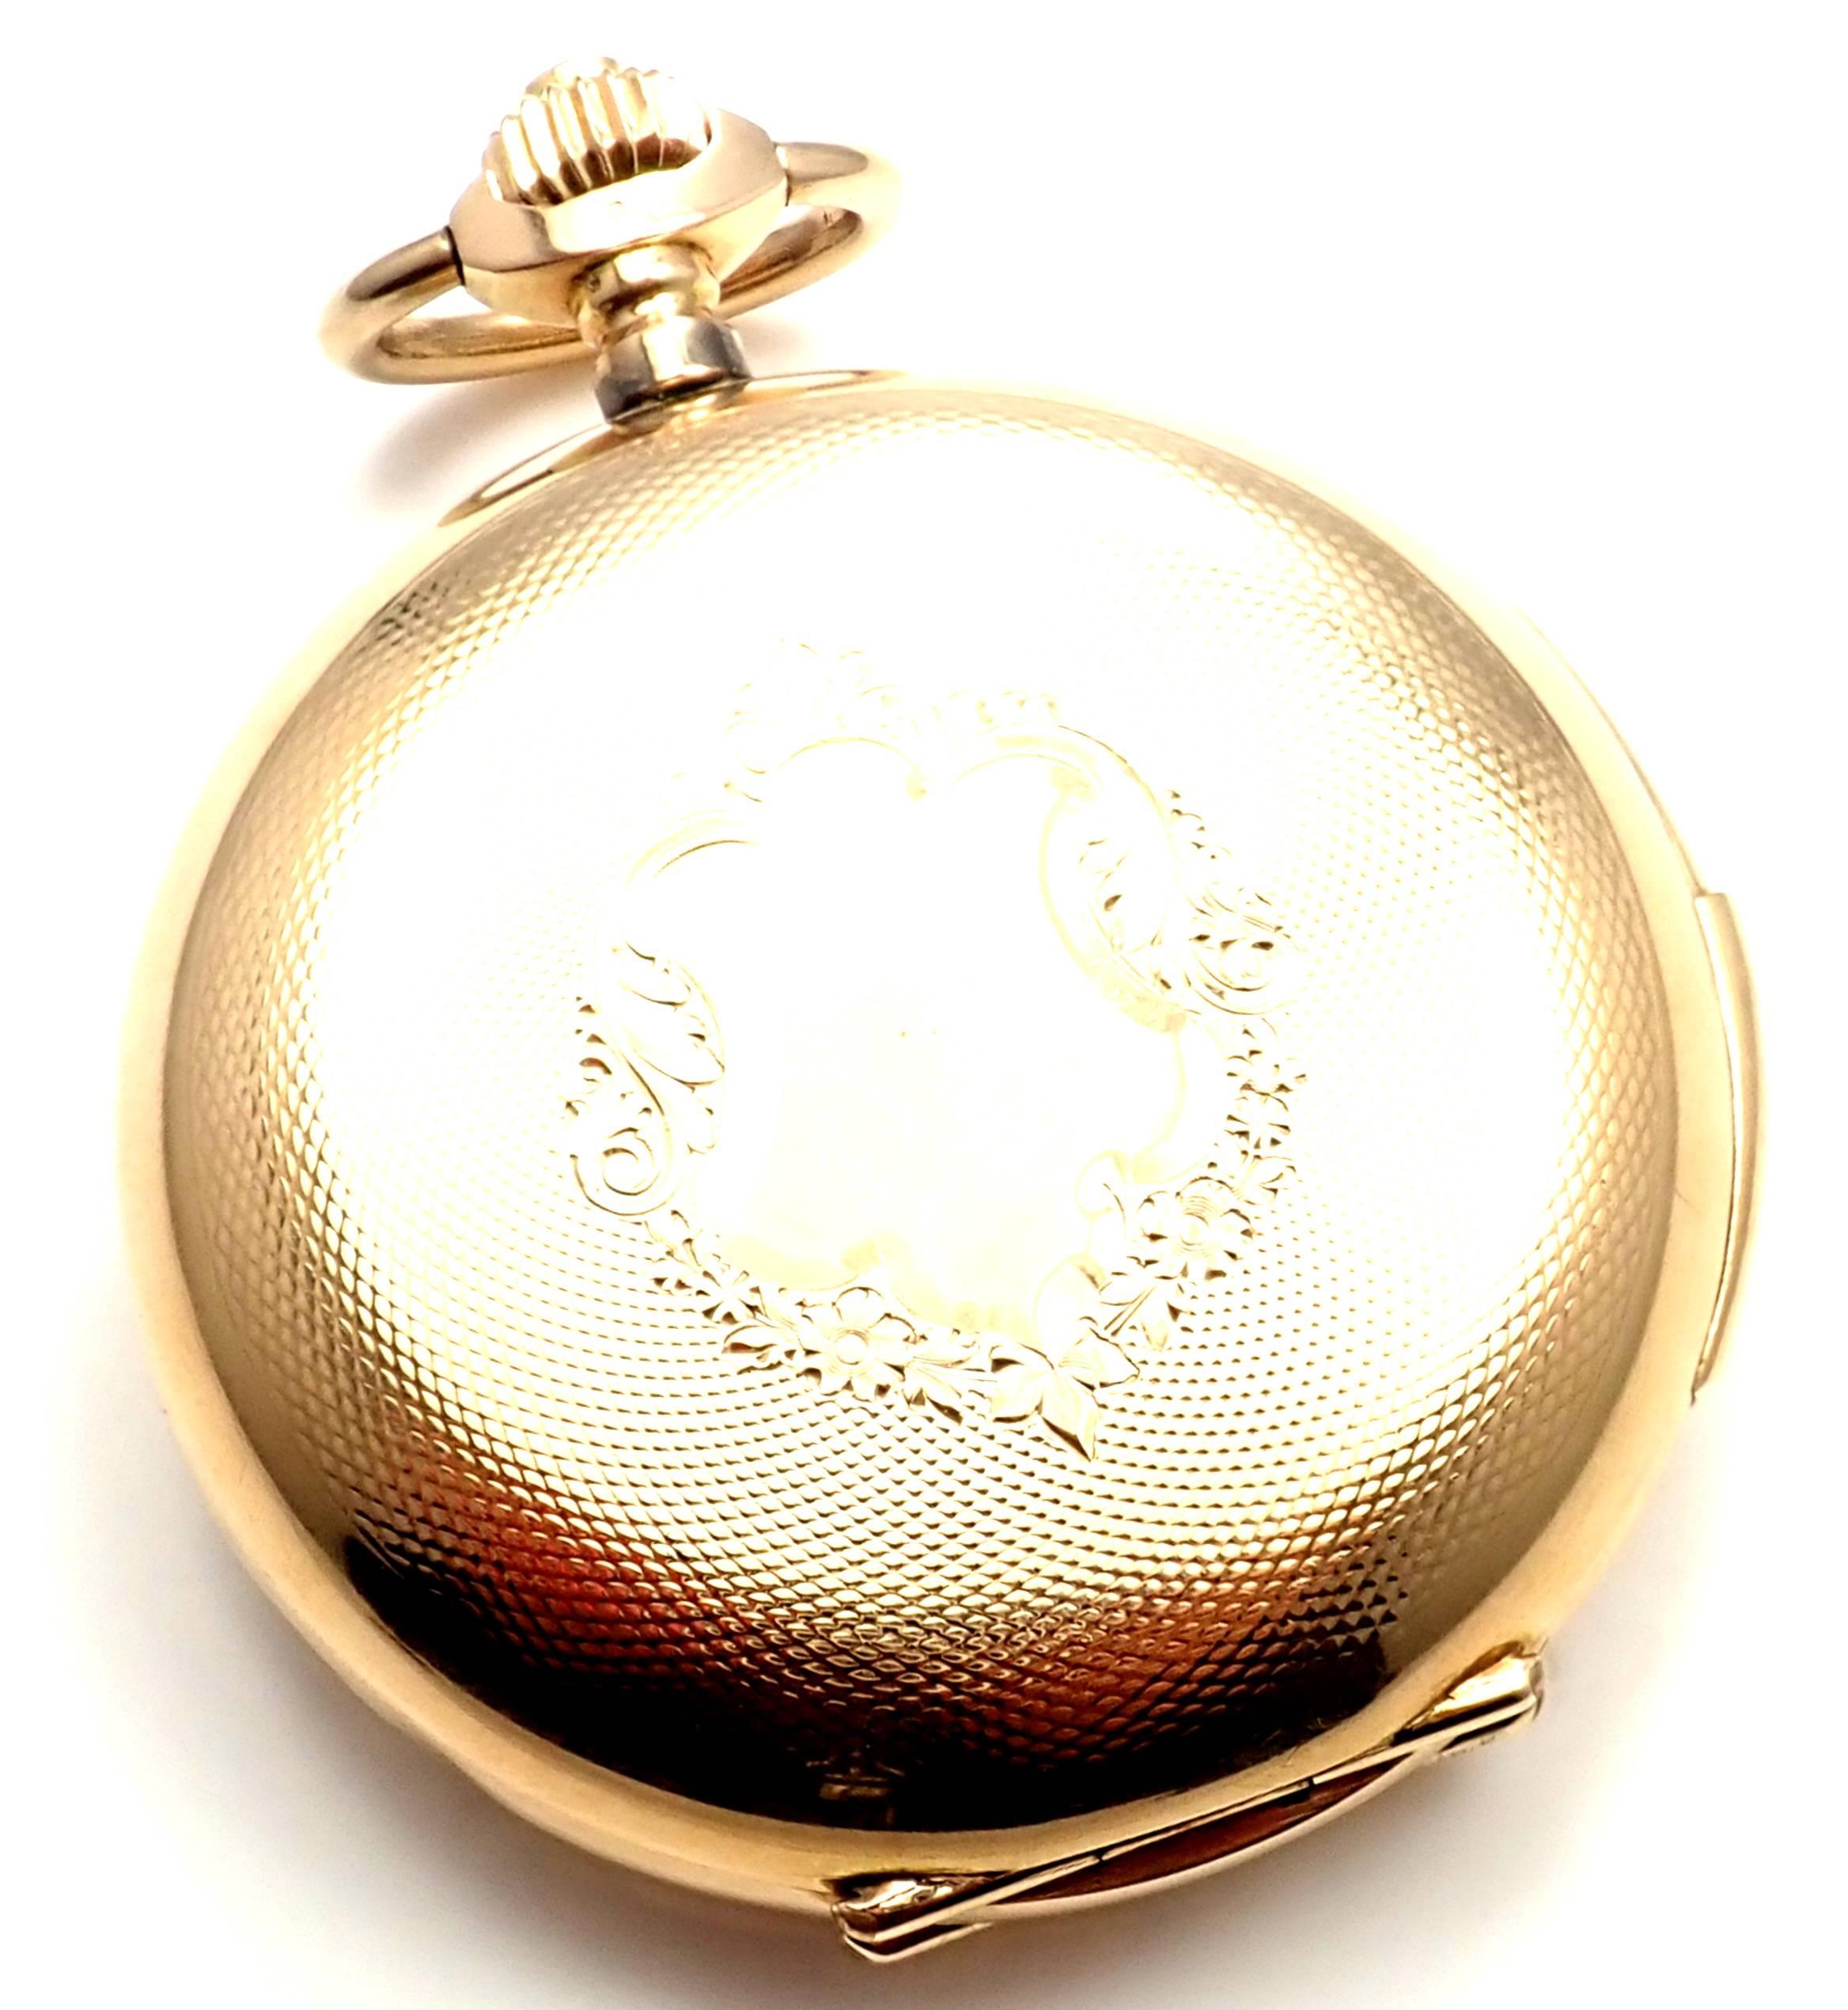 14k yellow gold hunting cased quarter repeater Swiss large 51mm pocket watch. 
This watch works great, fully functional. 
Case Size: 51mm
Weight: 93.9 grams
Dial: White Enamel
Movement: Quarter repeater
Stamped: 0.585 90851 51 High Grade